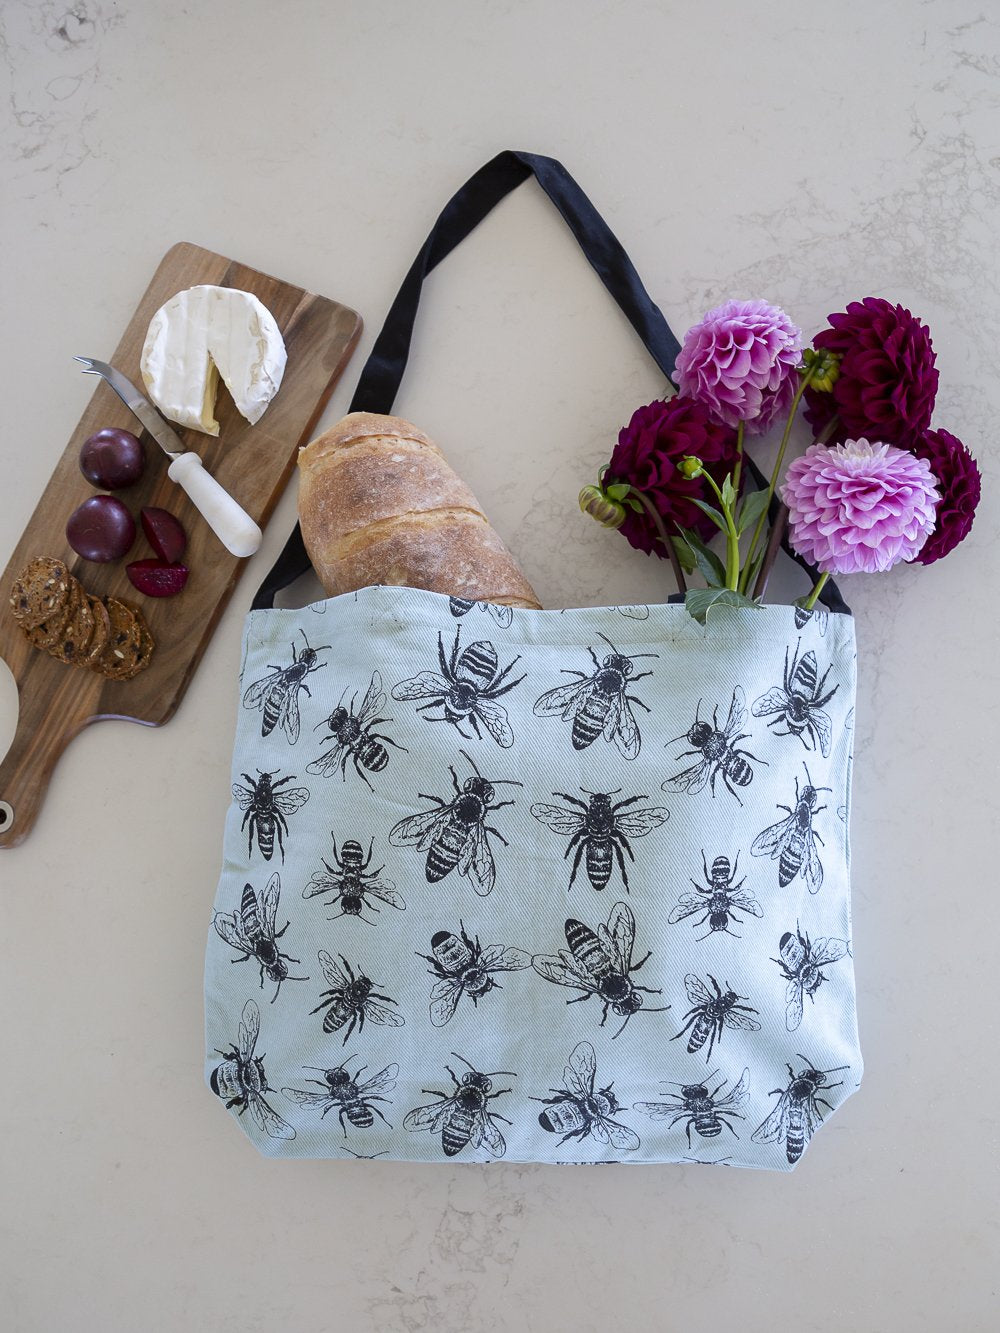 Busy Bees Tote Bag